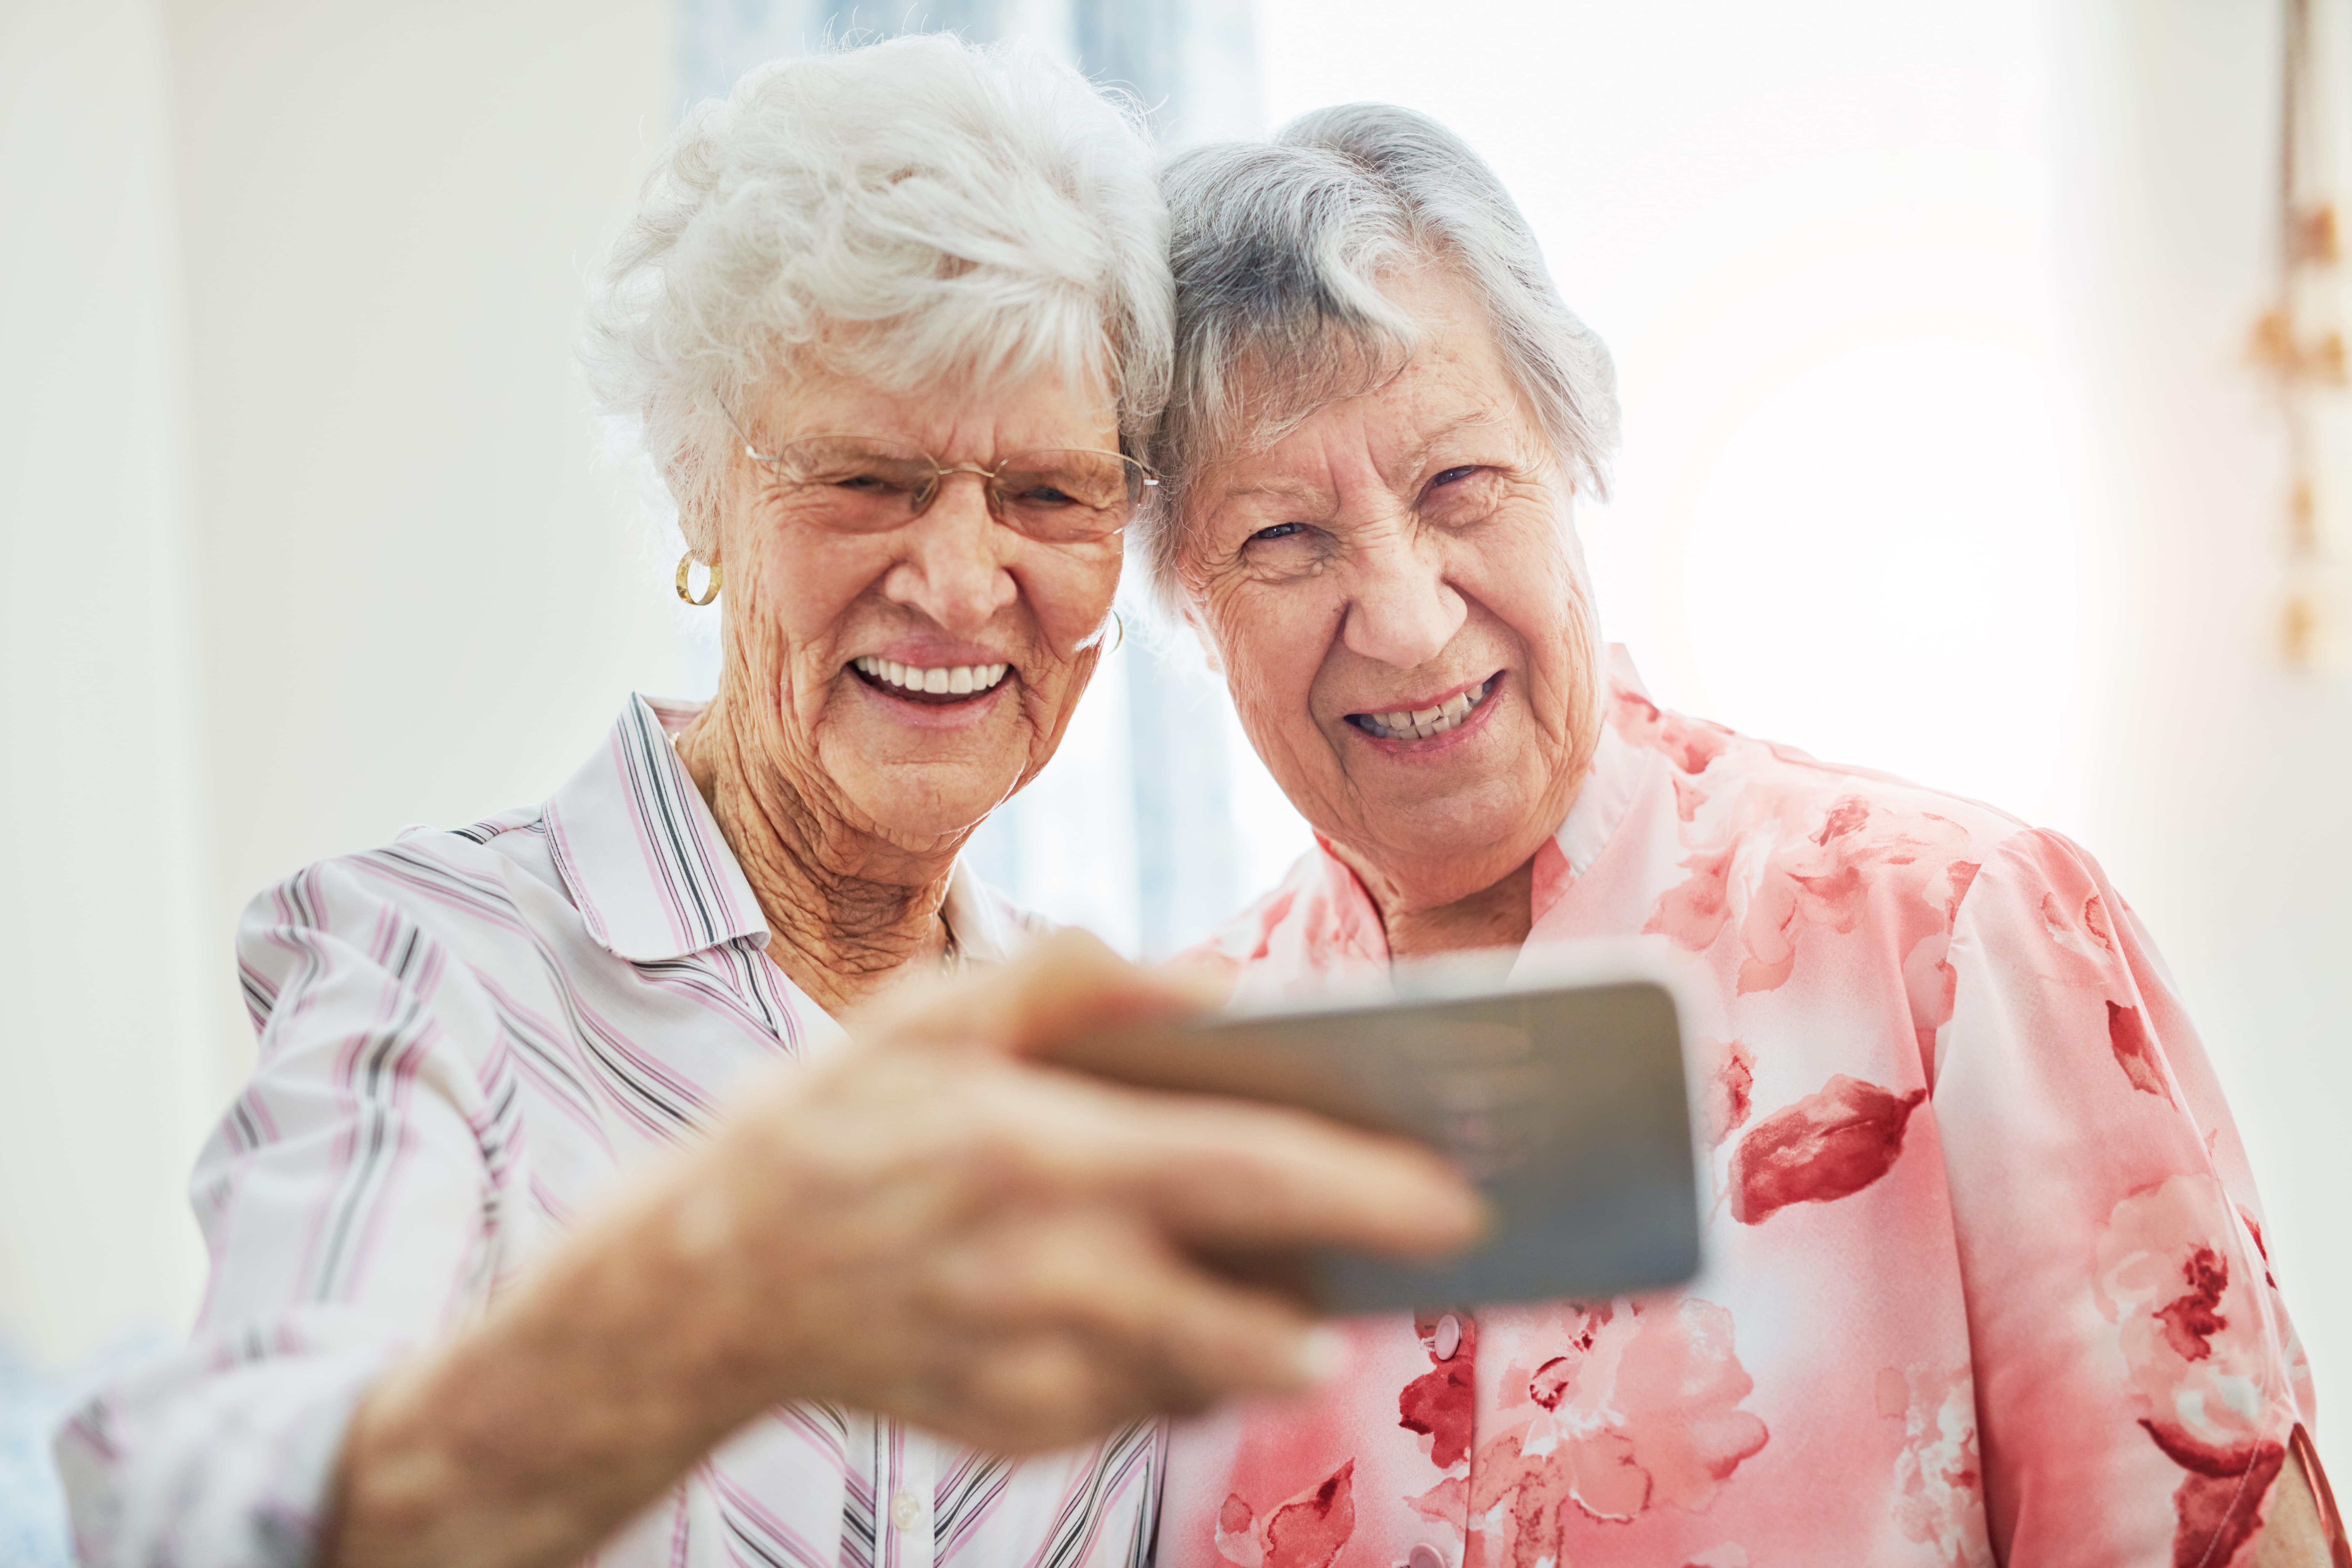 Two senior female friends taking a selfie together, smiling